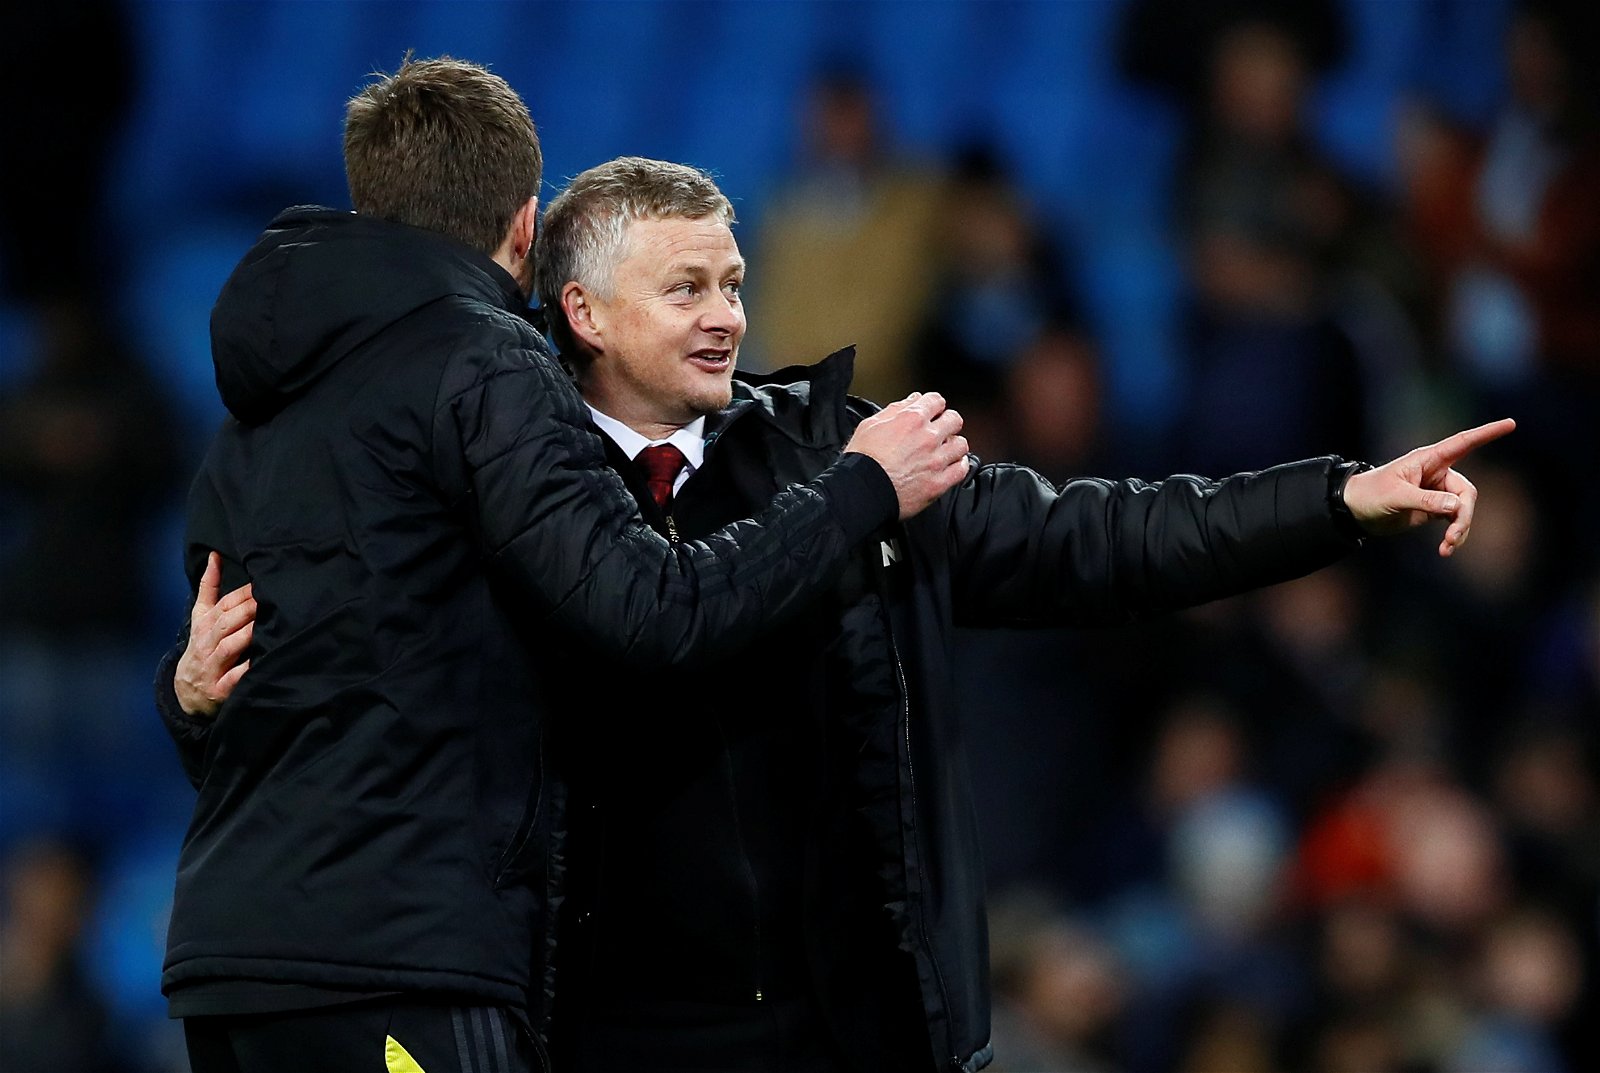 Ole doesn't doubt his abilities at Man United